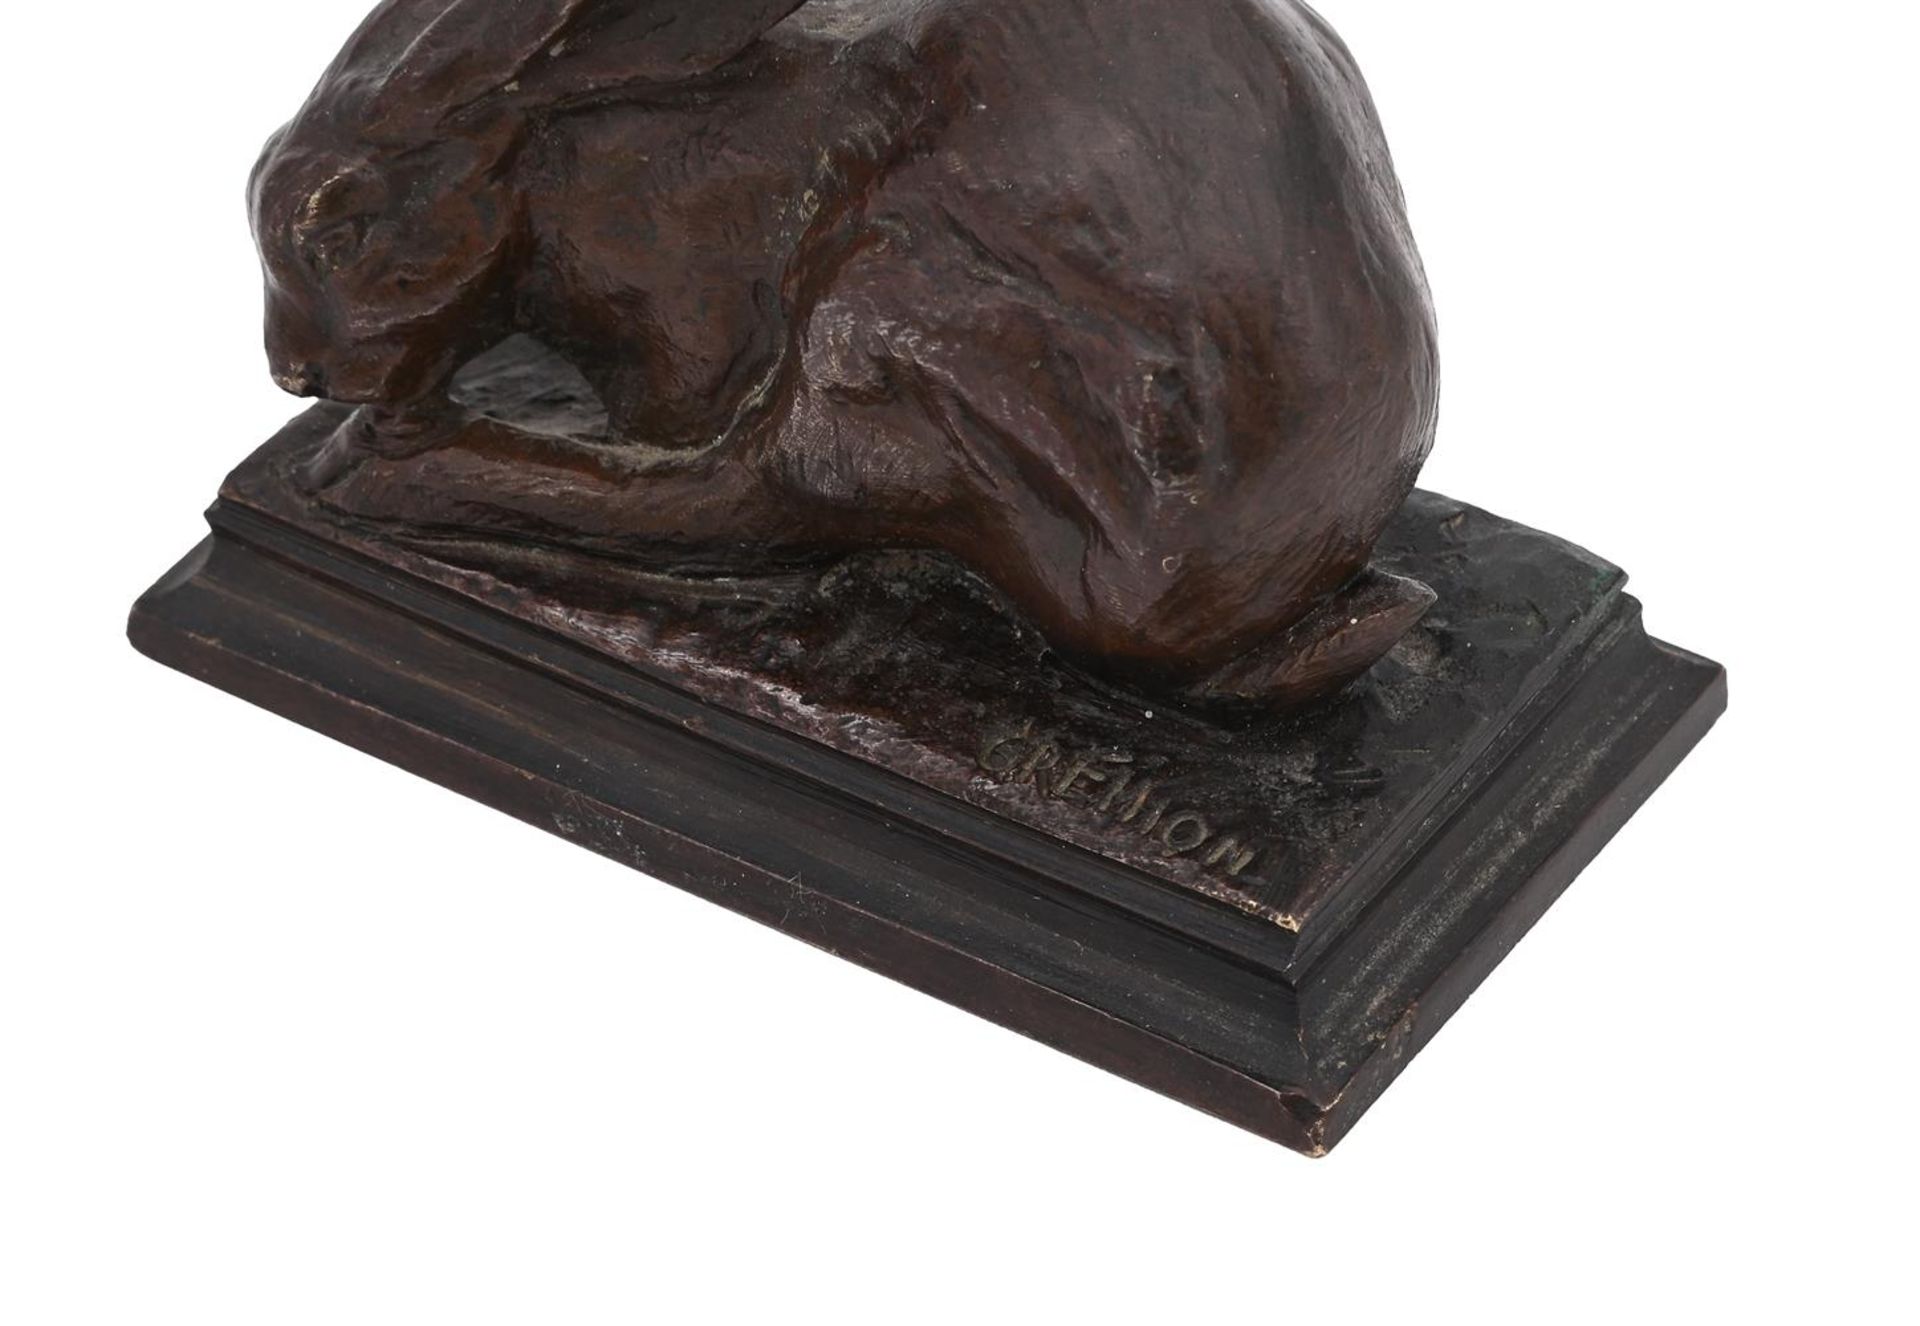 CHARLES GREMION (FRENCH, 19TH/20TH CENTURY), A BRONZE MODEL OF A HARE GROOMING - Image 4 of 5